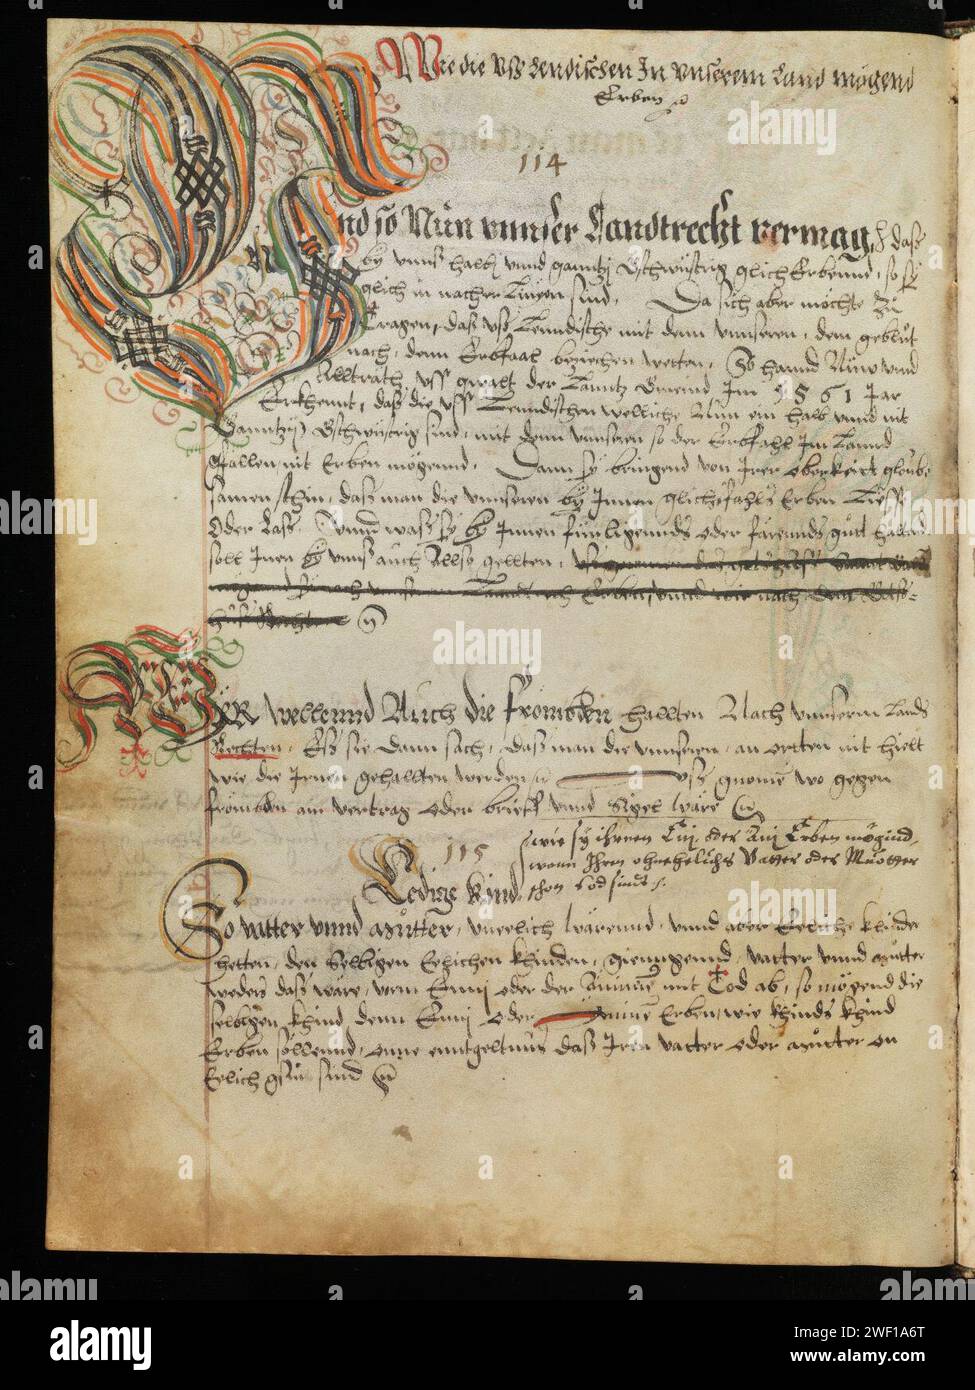 Appenzell, Landesarchiv Appenzell Innerrhoden, E.10.02.01.01, f. 32v – Silver Book of the Land. Stock Photo